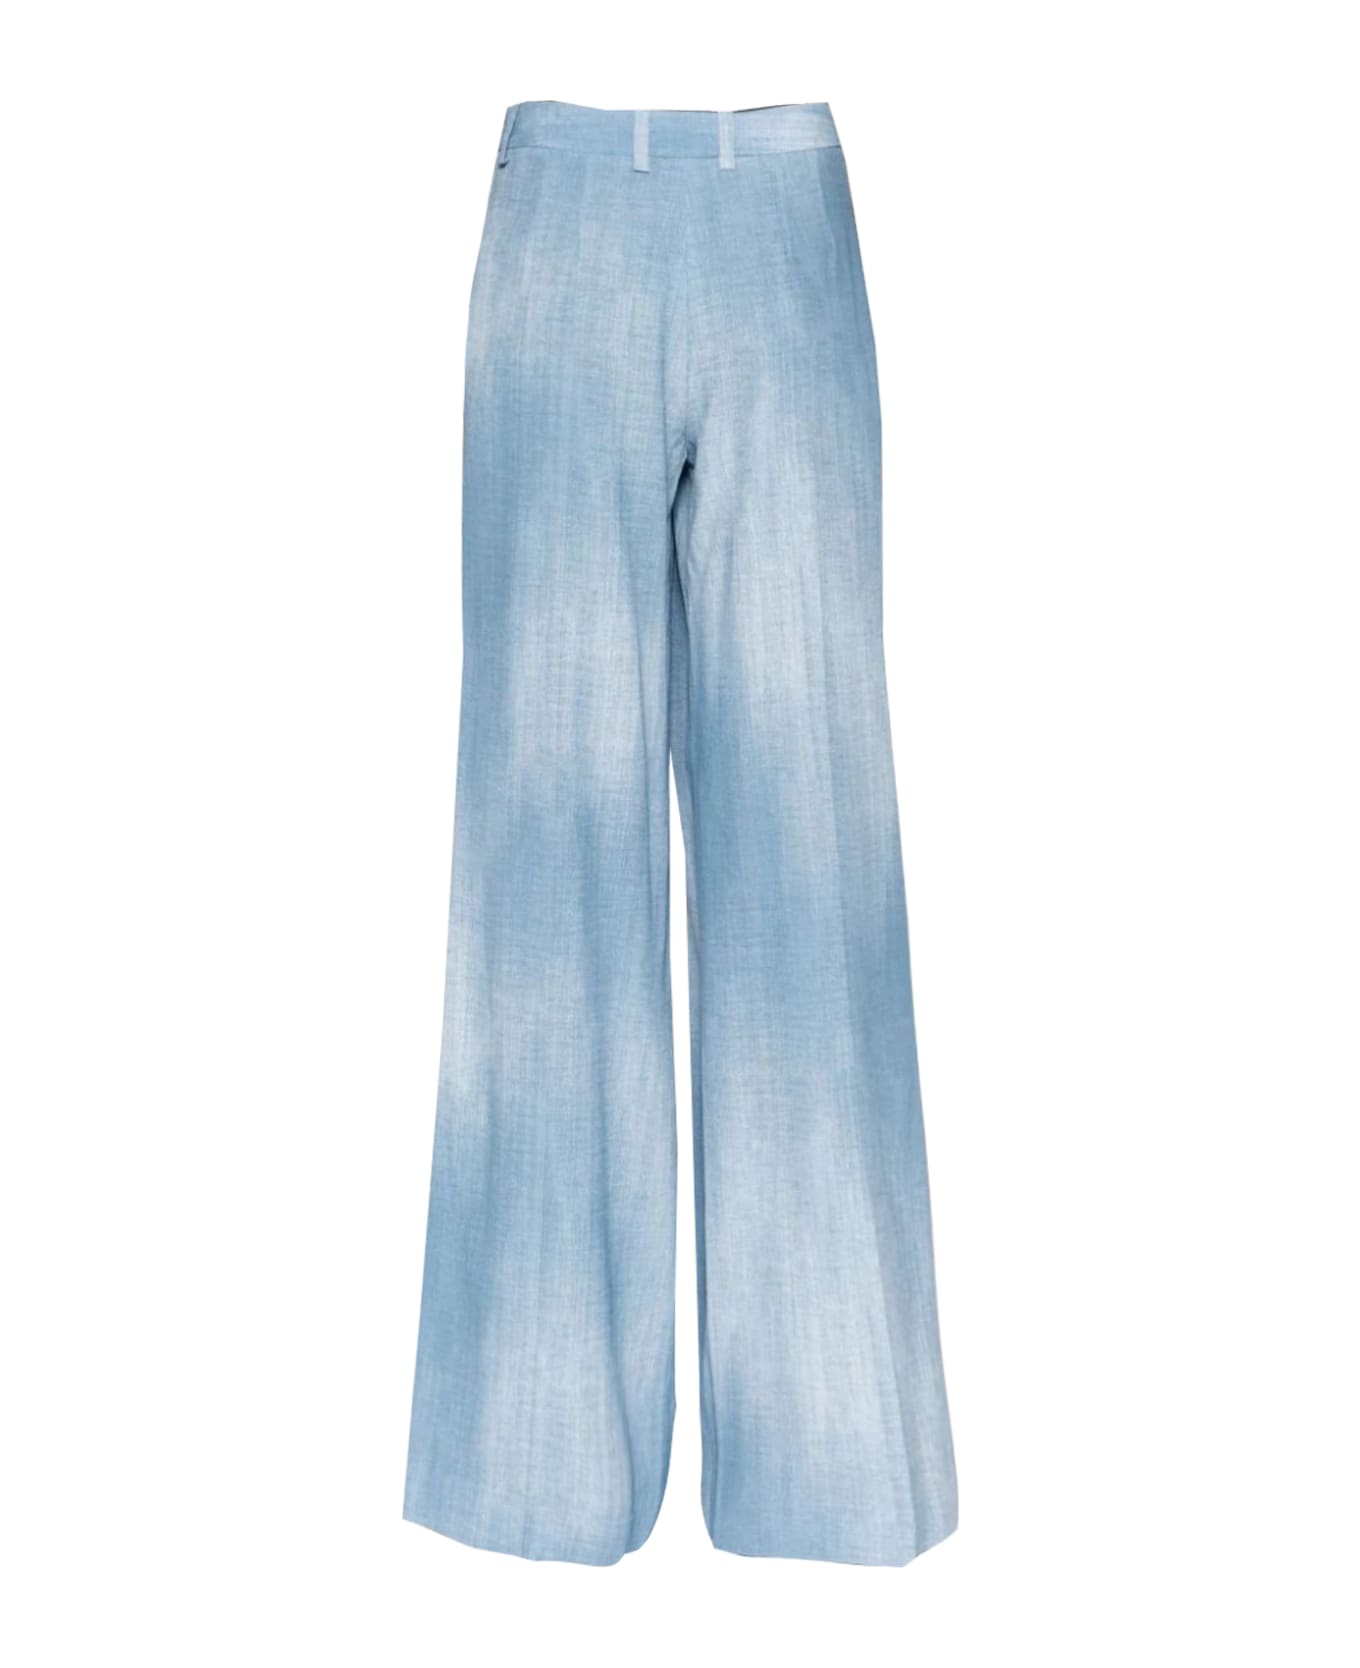 Ermanno Scervino Pants - Gnawed Blue ボトムス